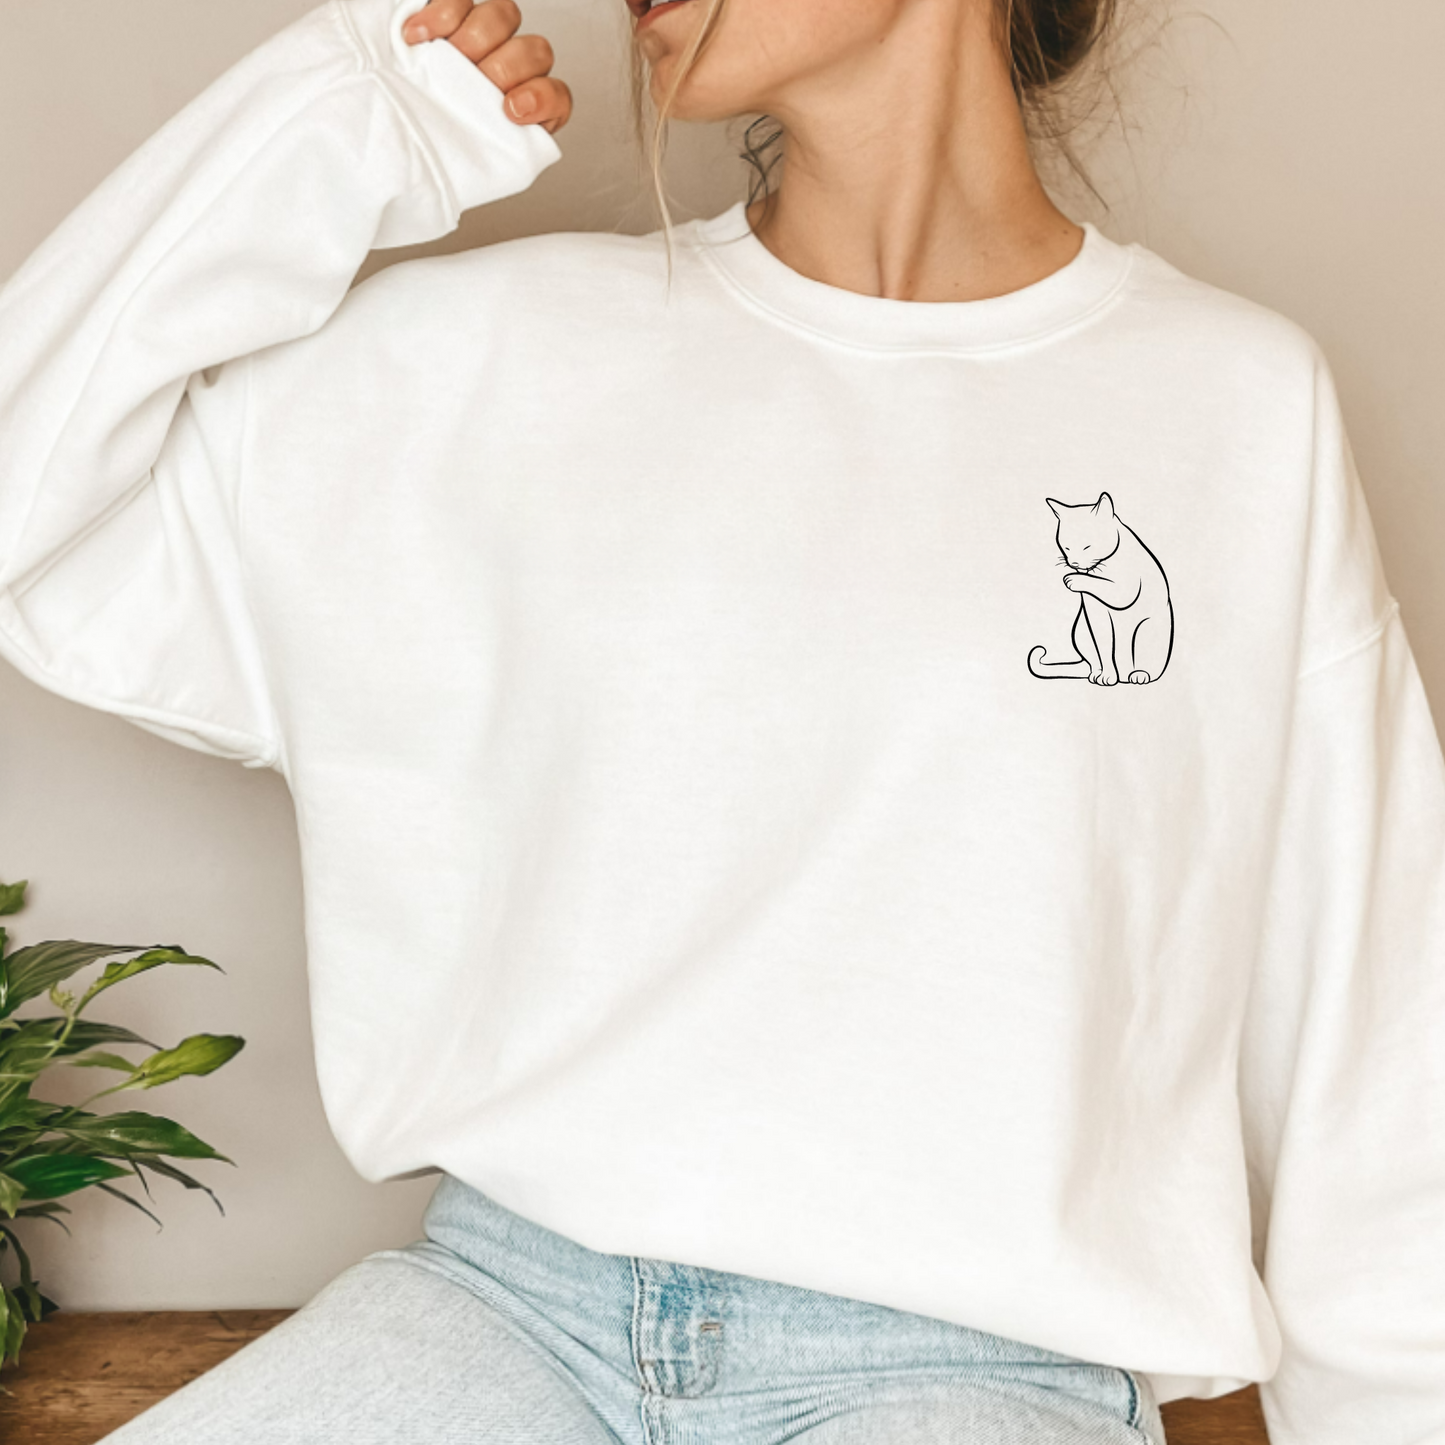 (Shirt not included) Cat Silhouette POCKET - Clear Film Transfer